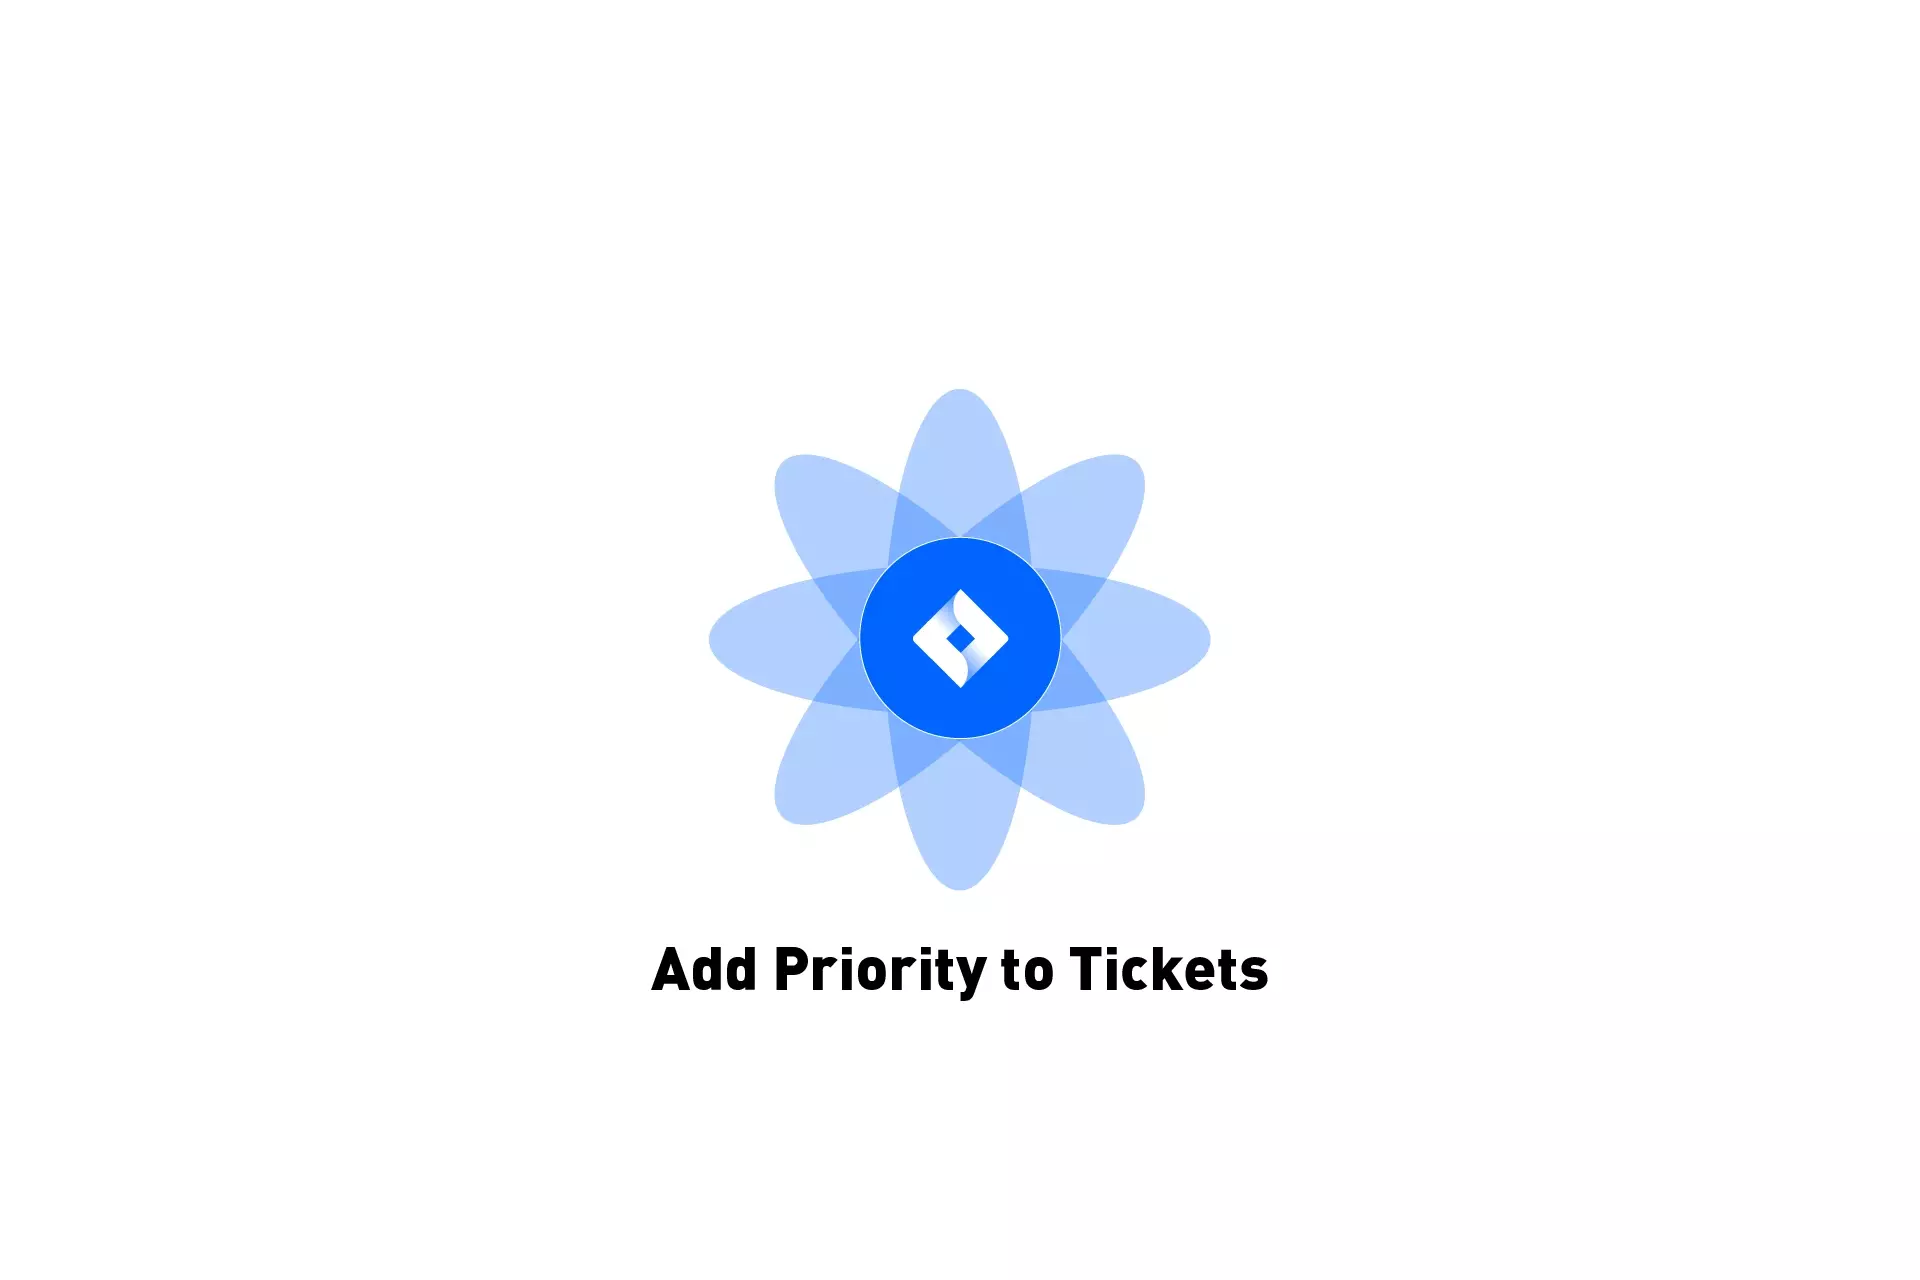 A flower that represents JIRA with the text "Add Priority to Tickets" beneath it.